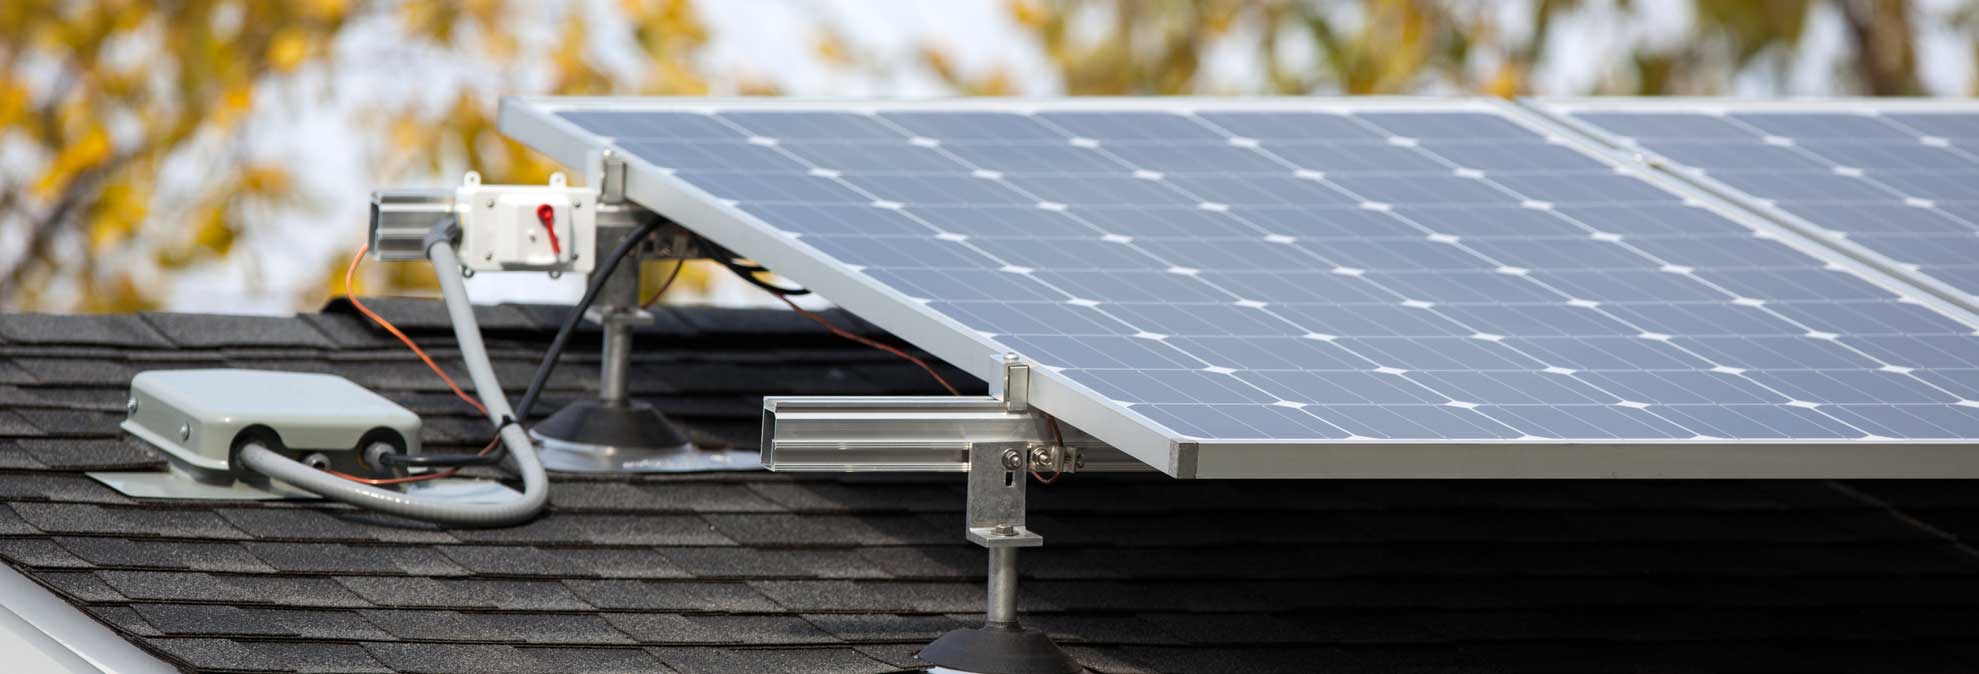 How to Install a Solar System and Not Get Burned - Consumer Reports